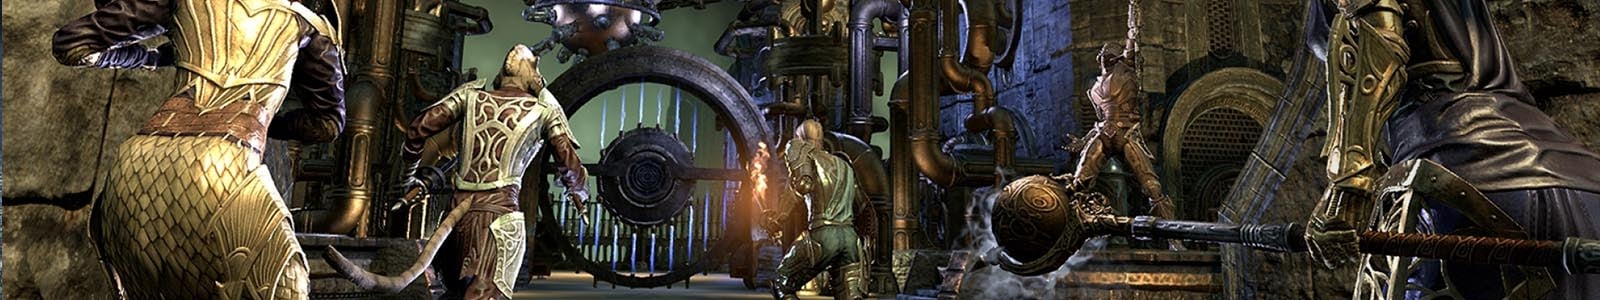 Unstable Wall of Elements Skill - ESO header